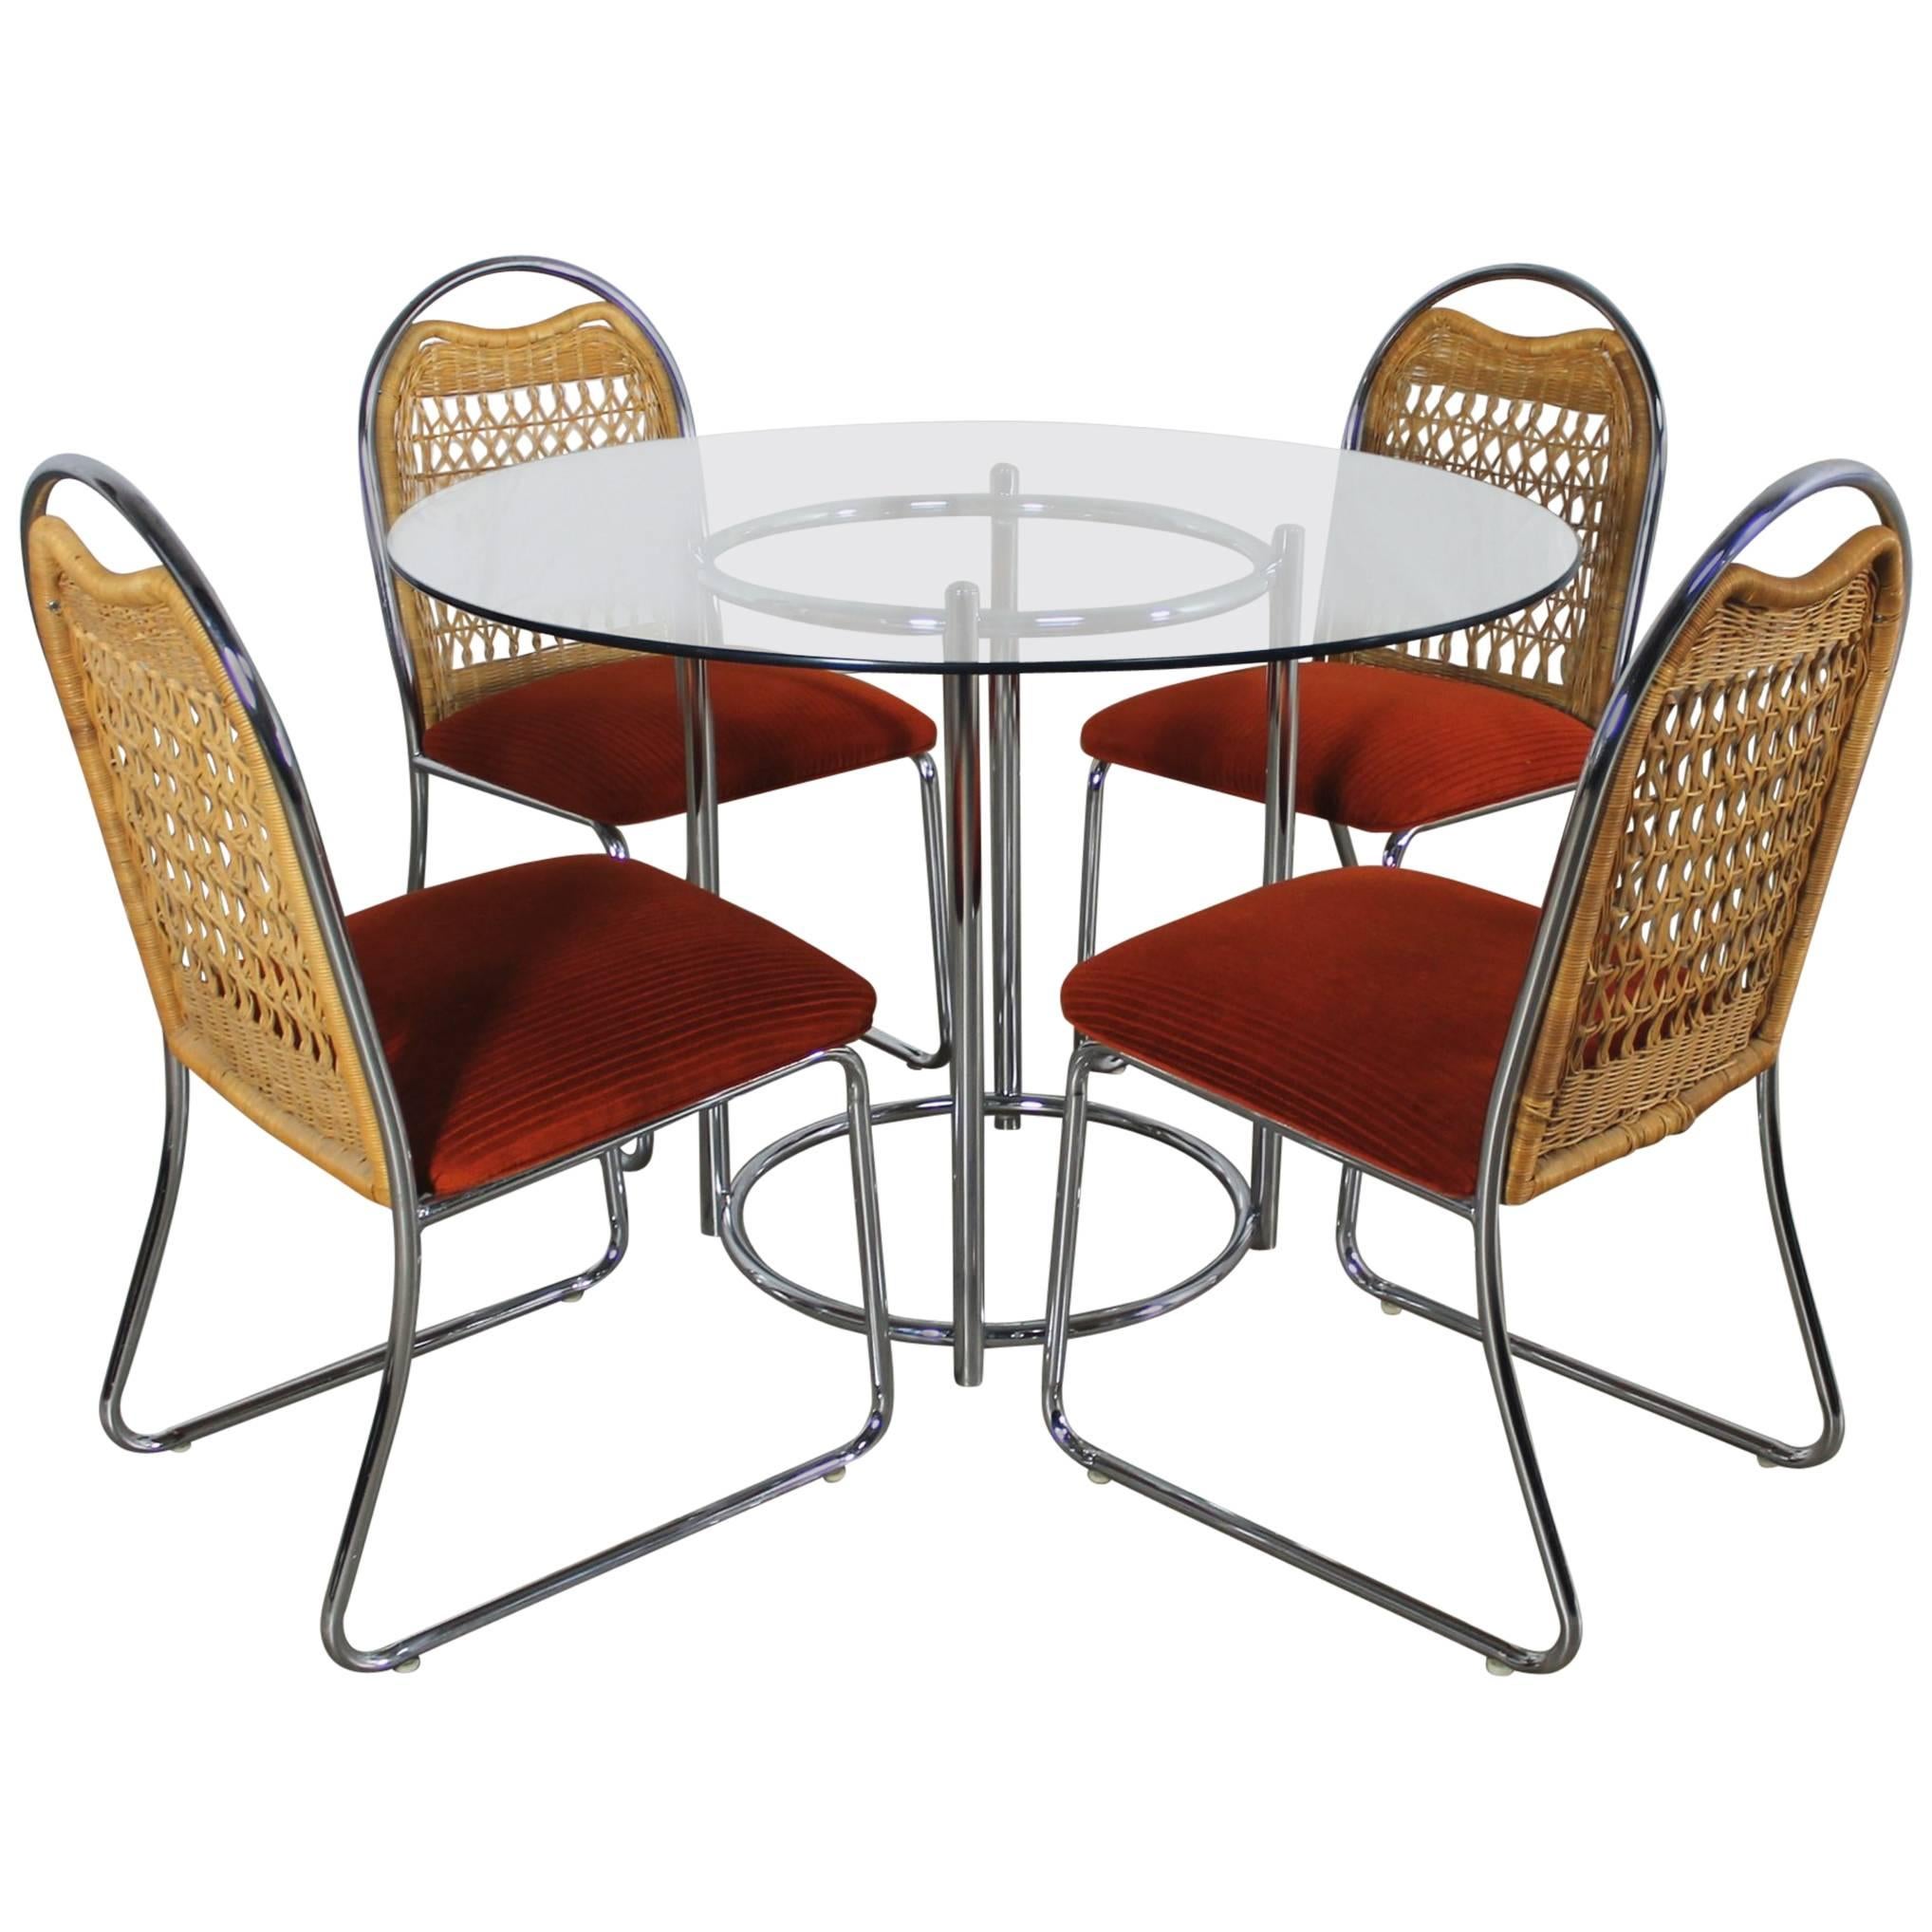 Mid-Century Daystrom Round Glass Chrome Dinette Table and Four Wicker Chairs